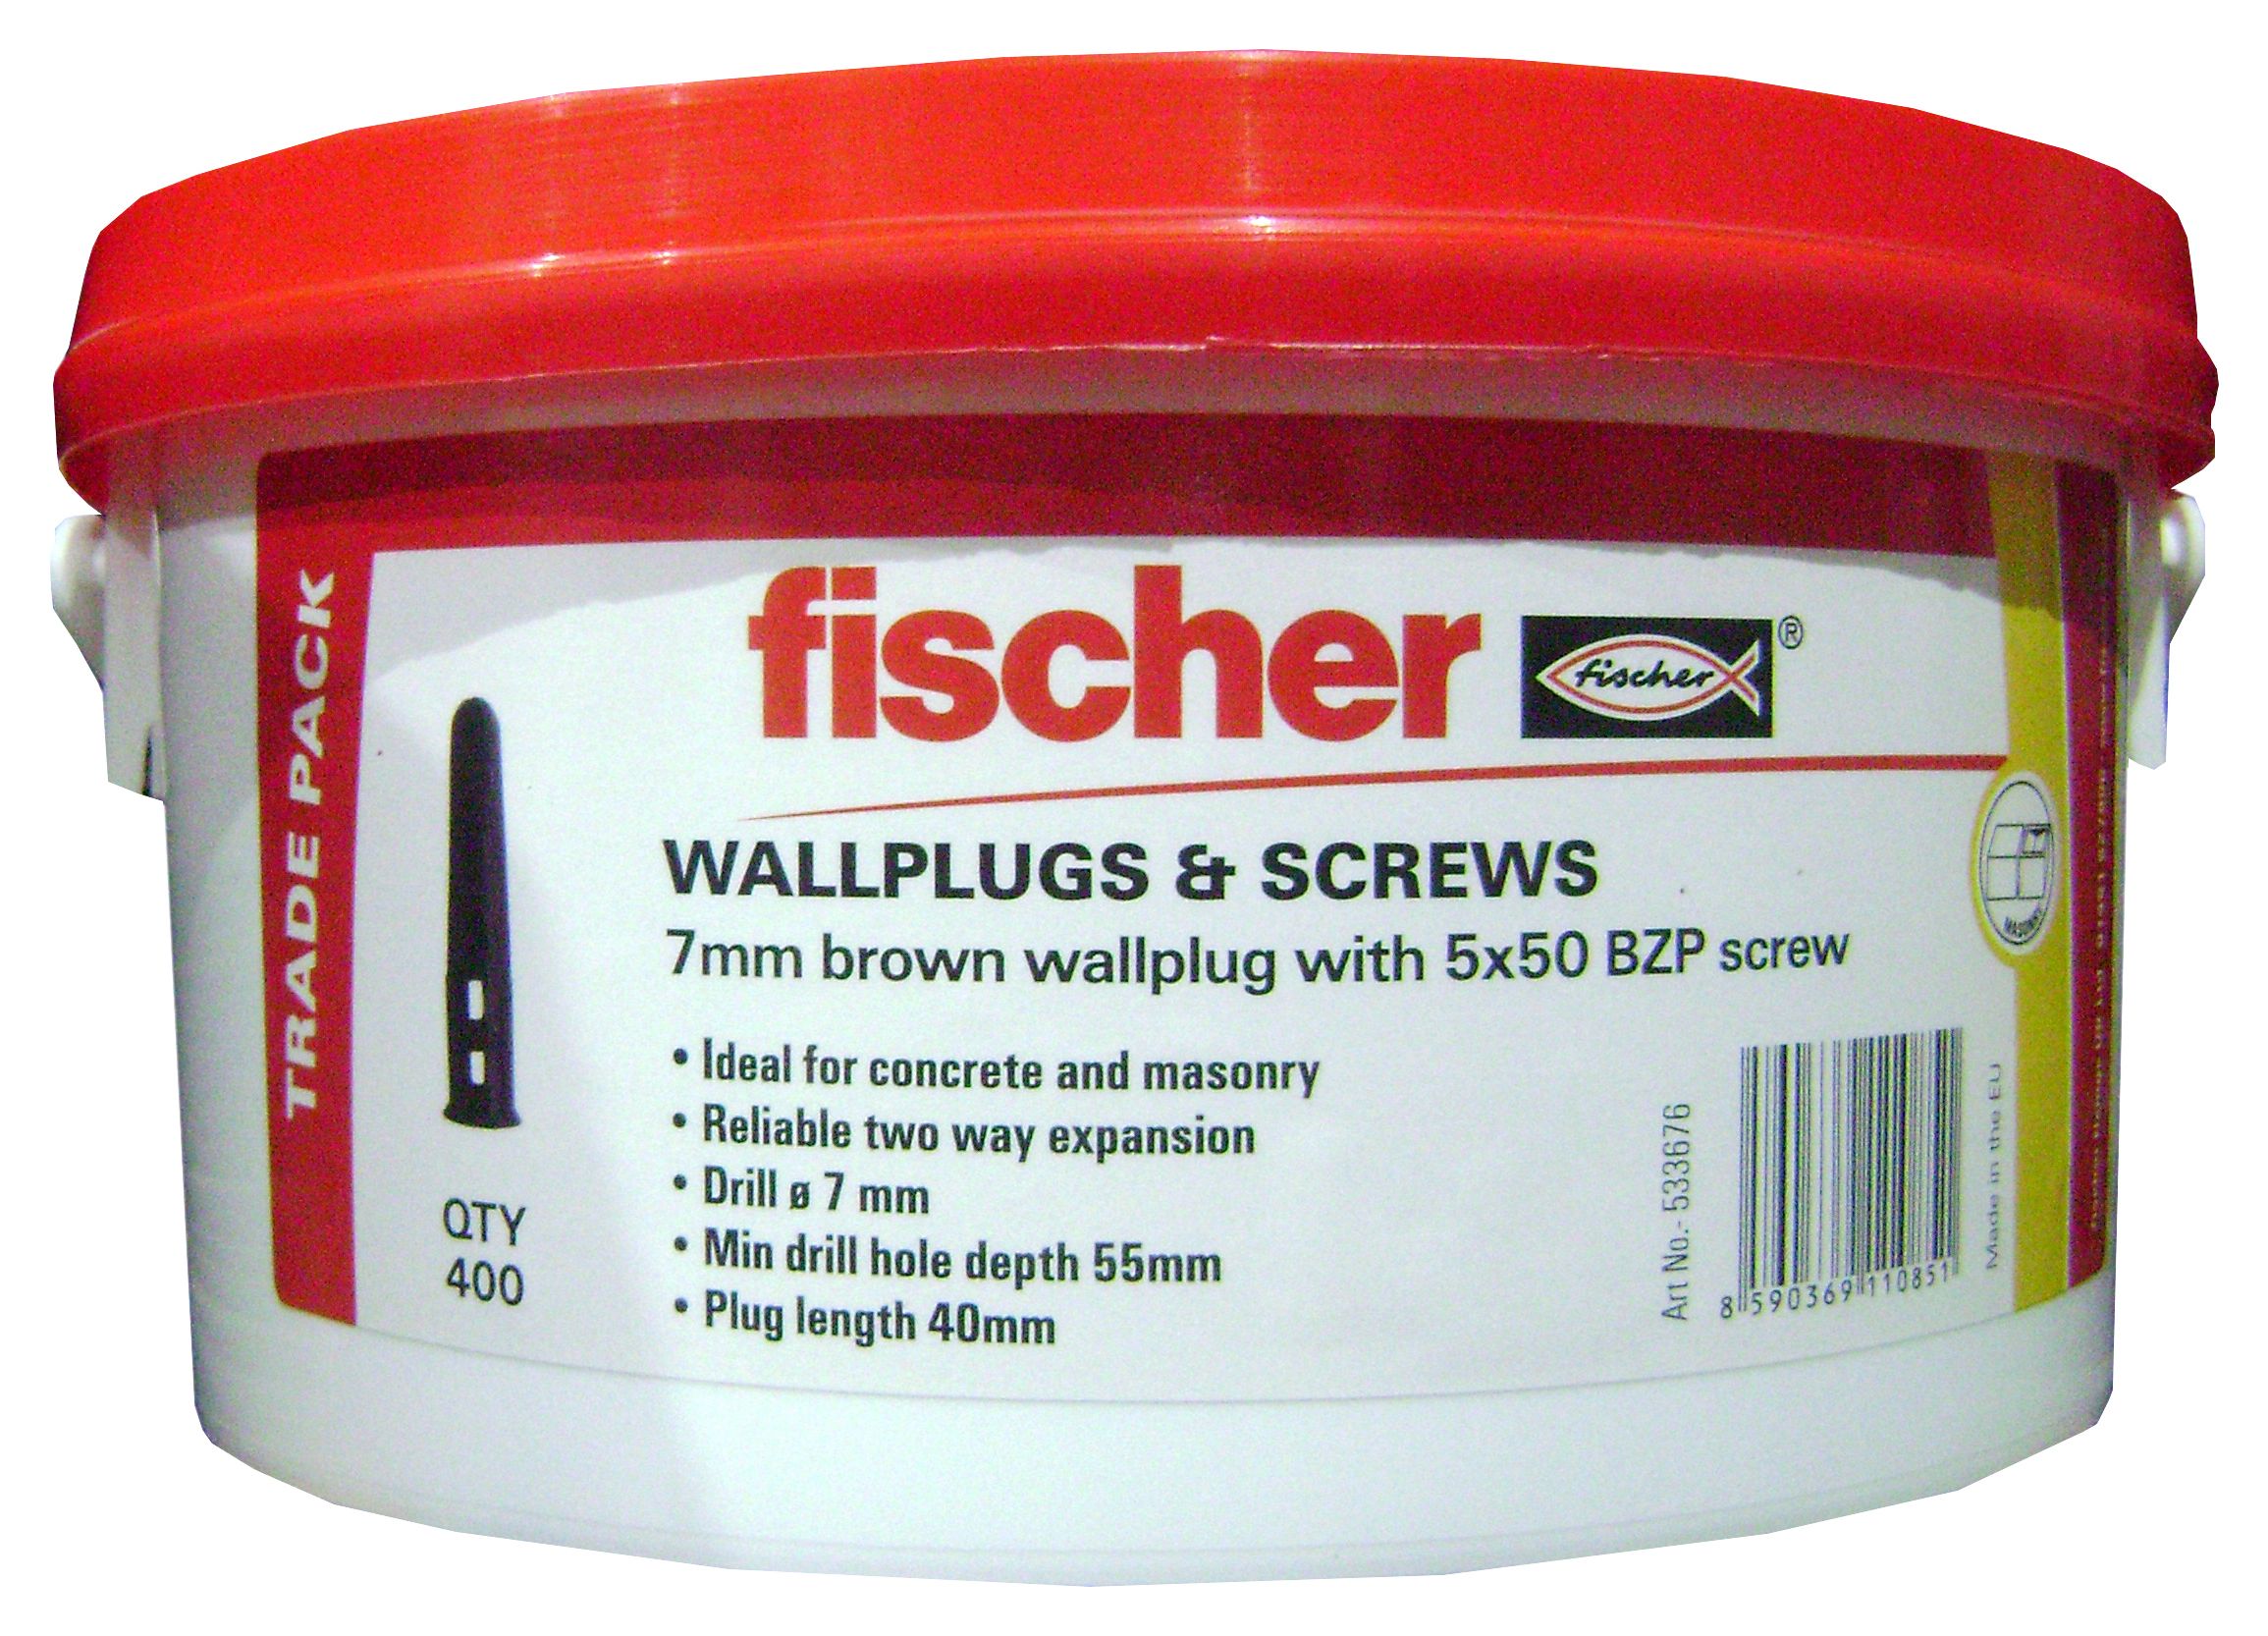 Image of Fischer Wall Plugs Brown 7mm W/ Screws Tub 400 Pack